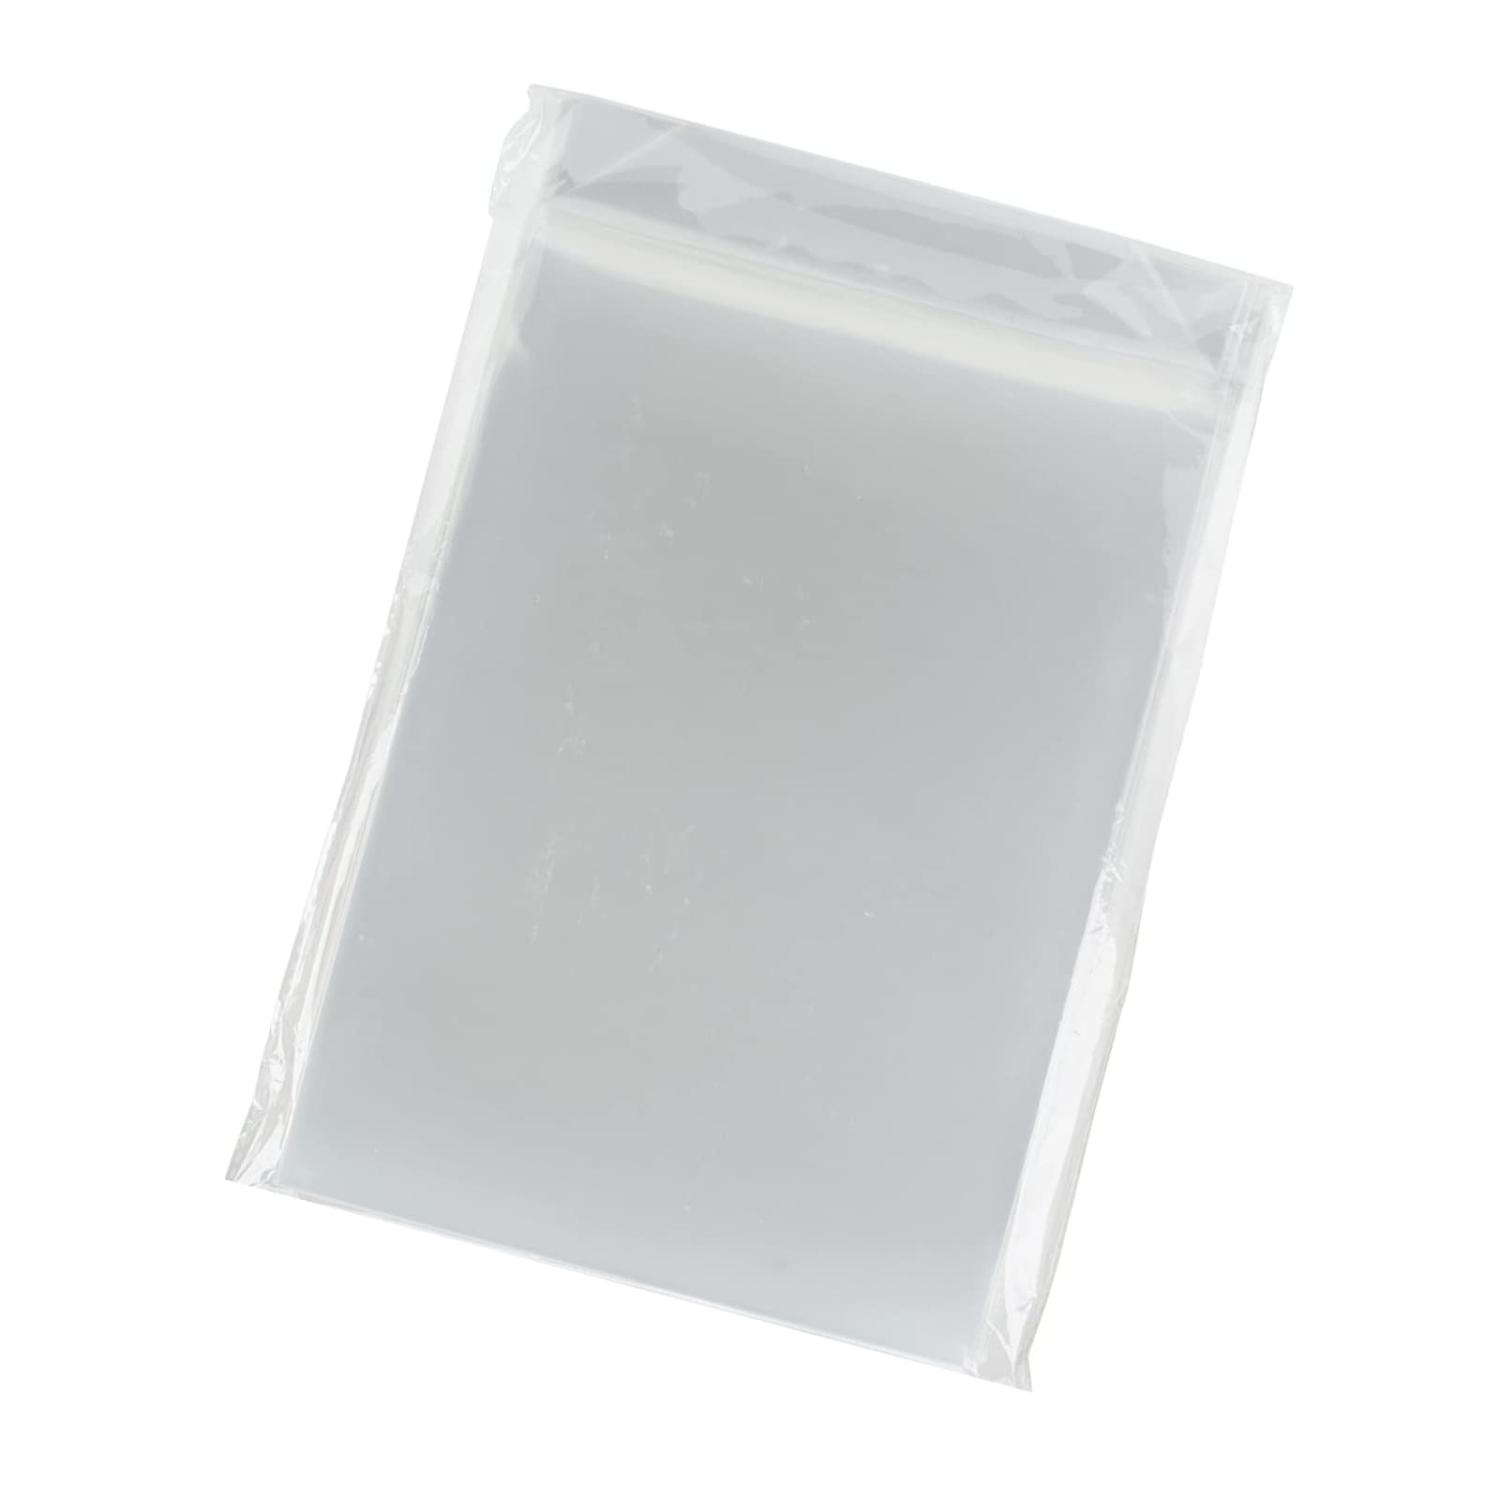 50 Maxtek Clear Stamp and Die Storage Pockets CPP Plastic Pockets Extra  Large 6.75 x 9.25 Inches.